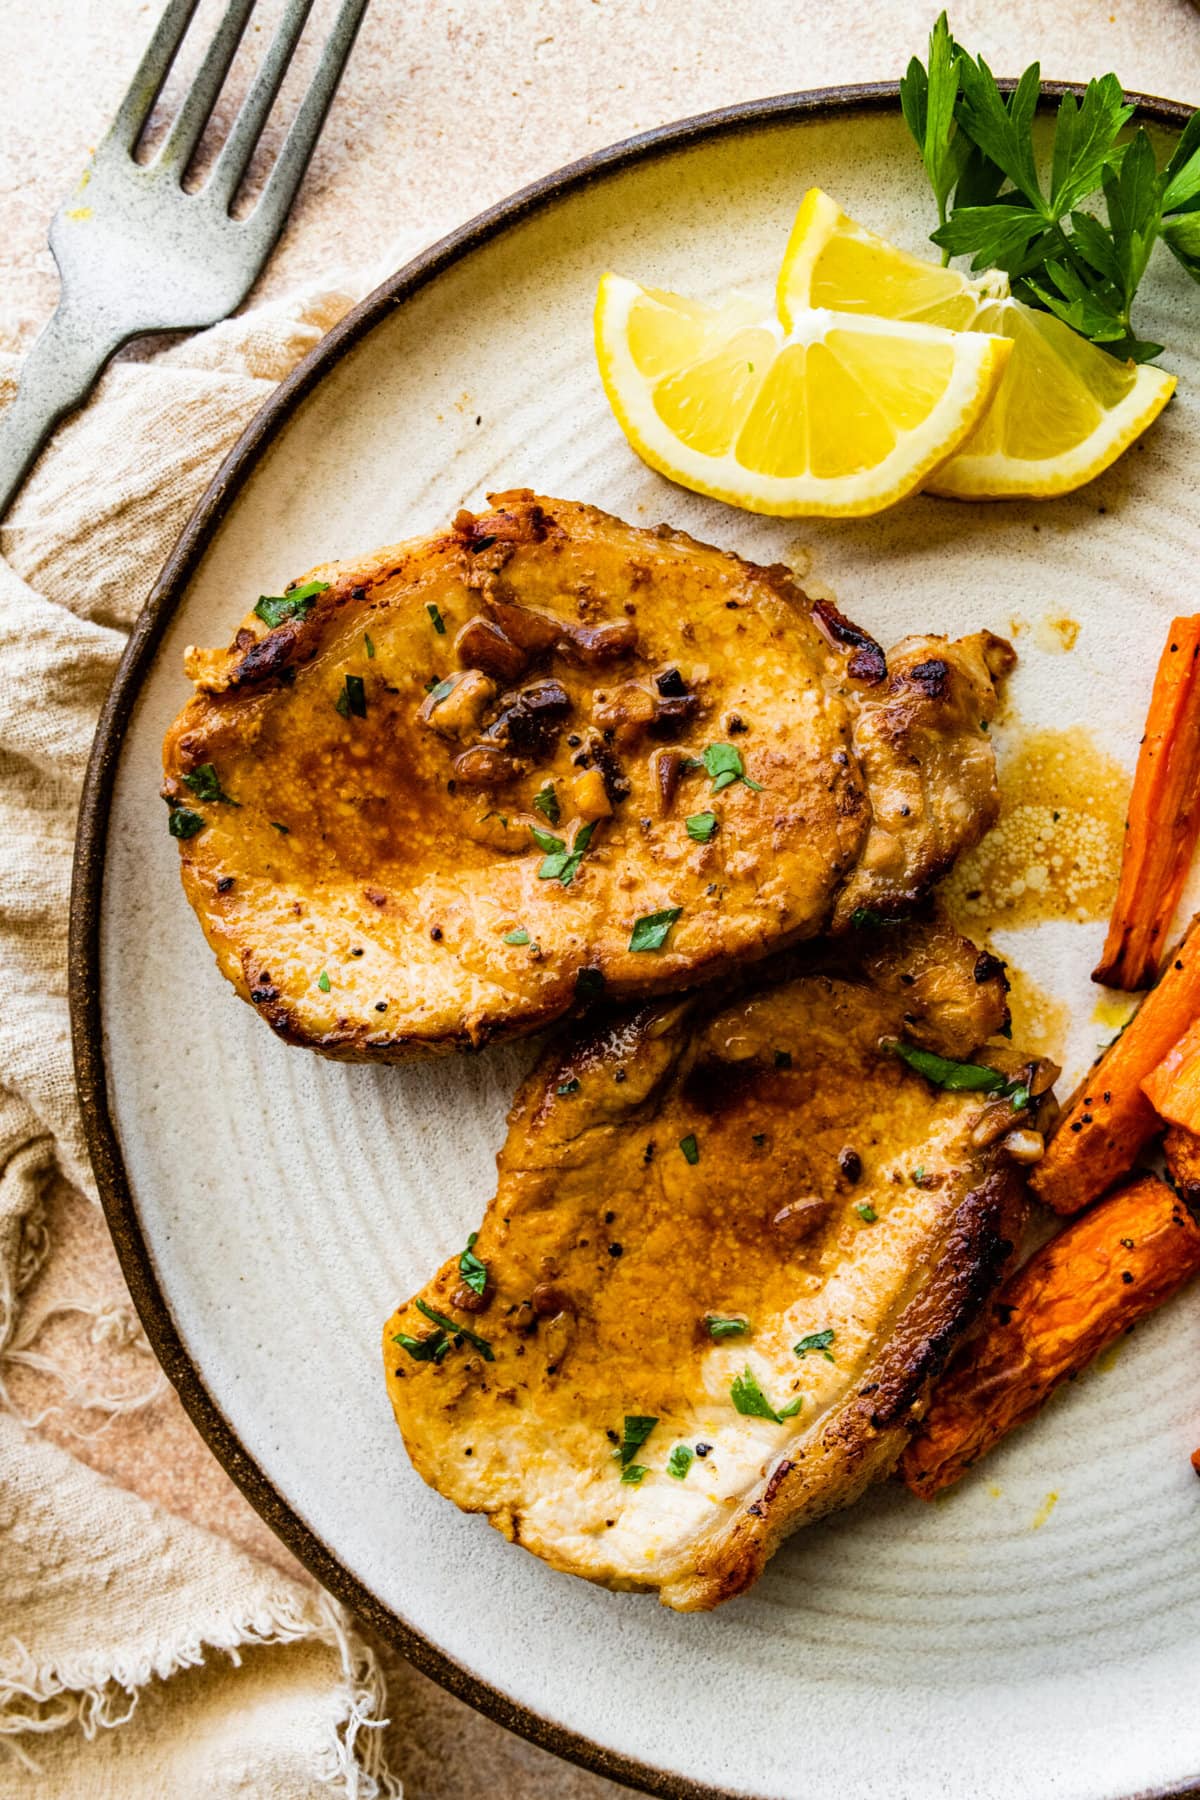 two juicy thin pork chops on a plate wit cooked carrots as a side dish.